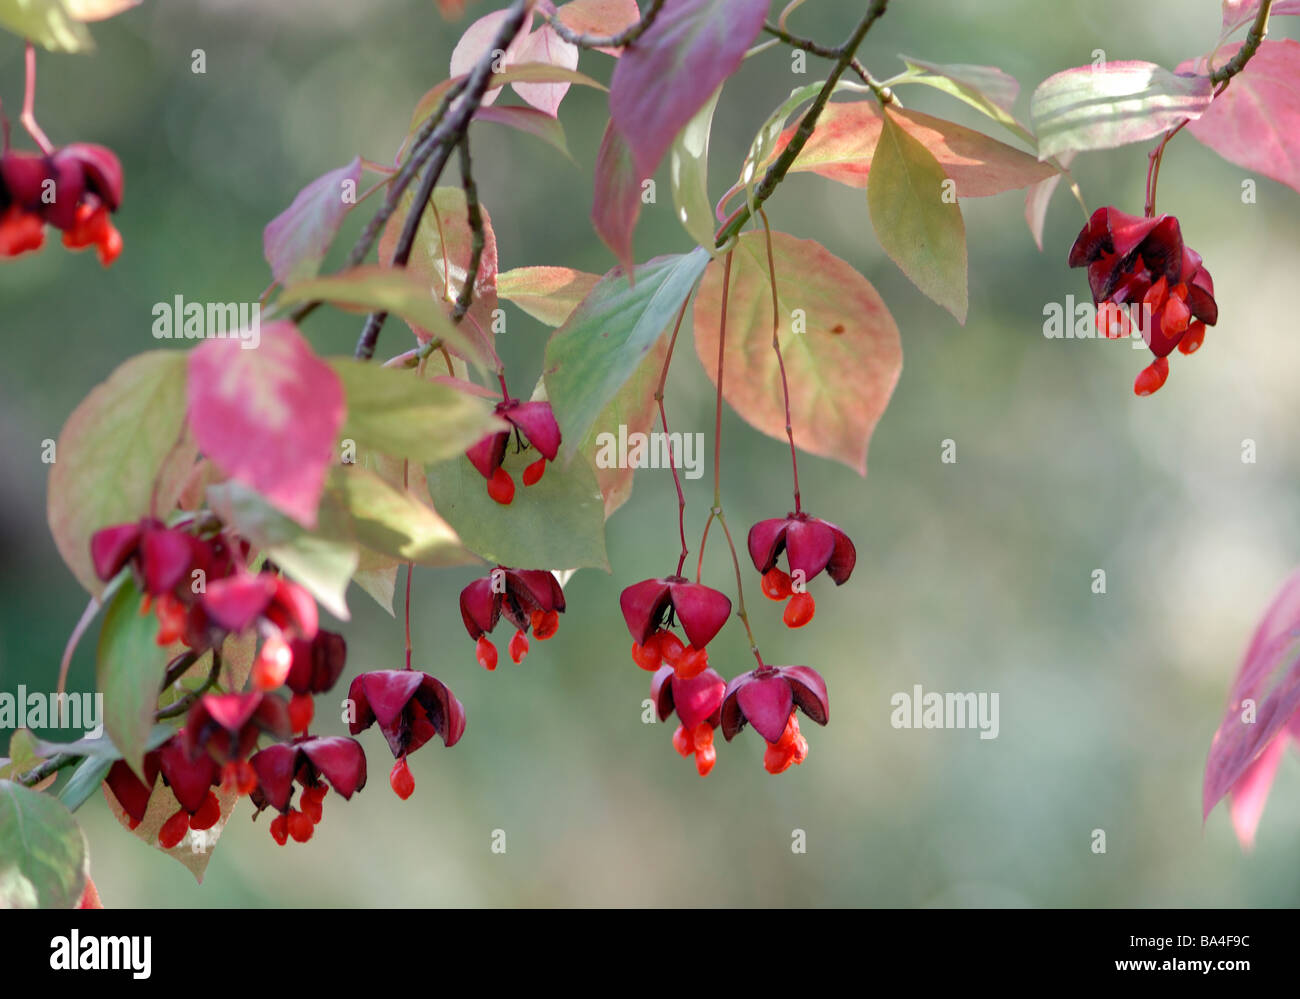 The pink fruit of the Spindle tree (Euonymus europaeus) burst open in autumn to reveal the orange seeds. Stock Photo